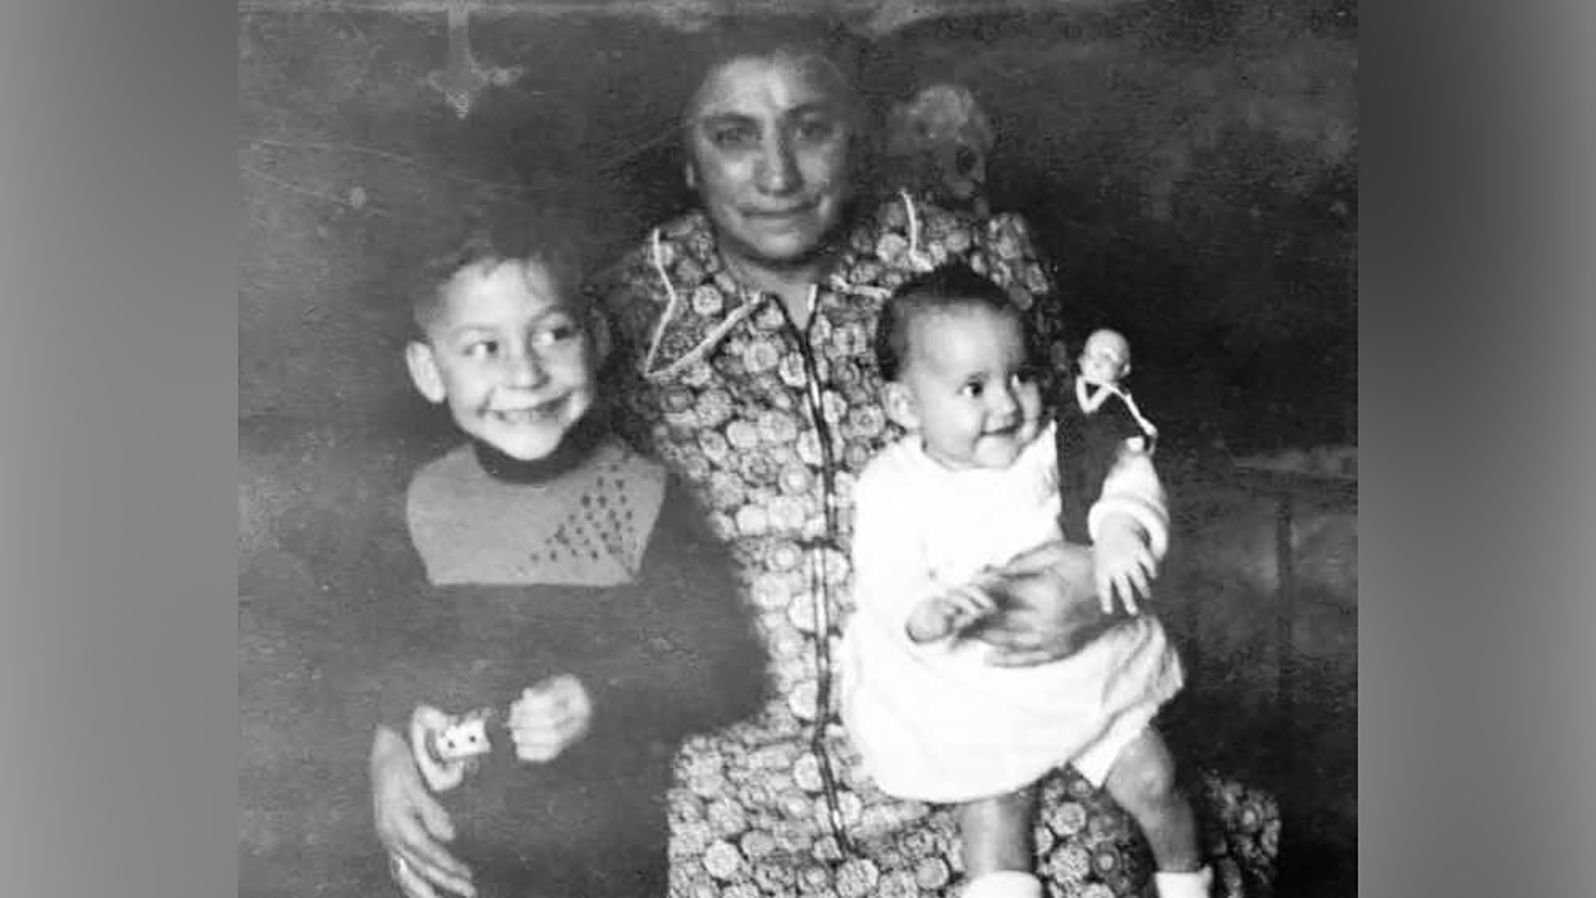 Dedie and Lies spent much time together with their grandmother Sara who also died at Sobibor.